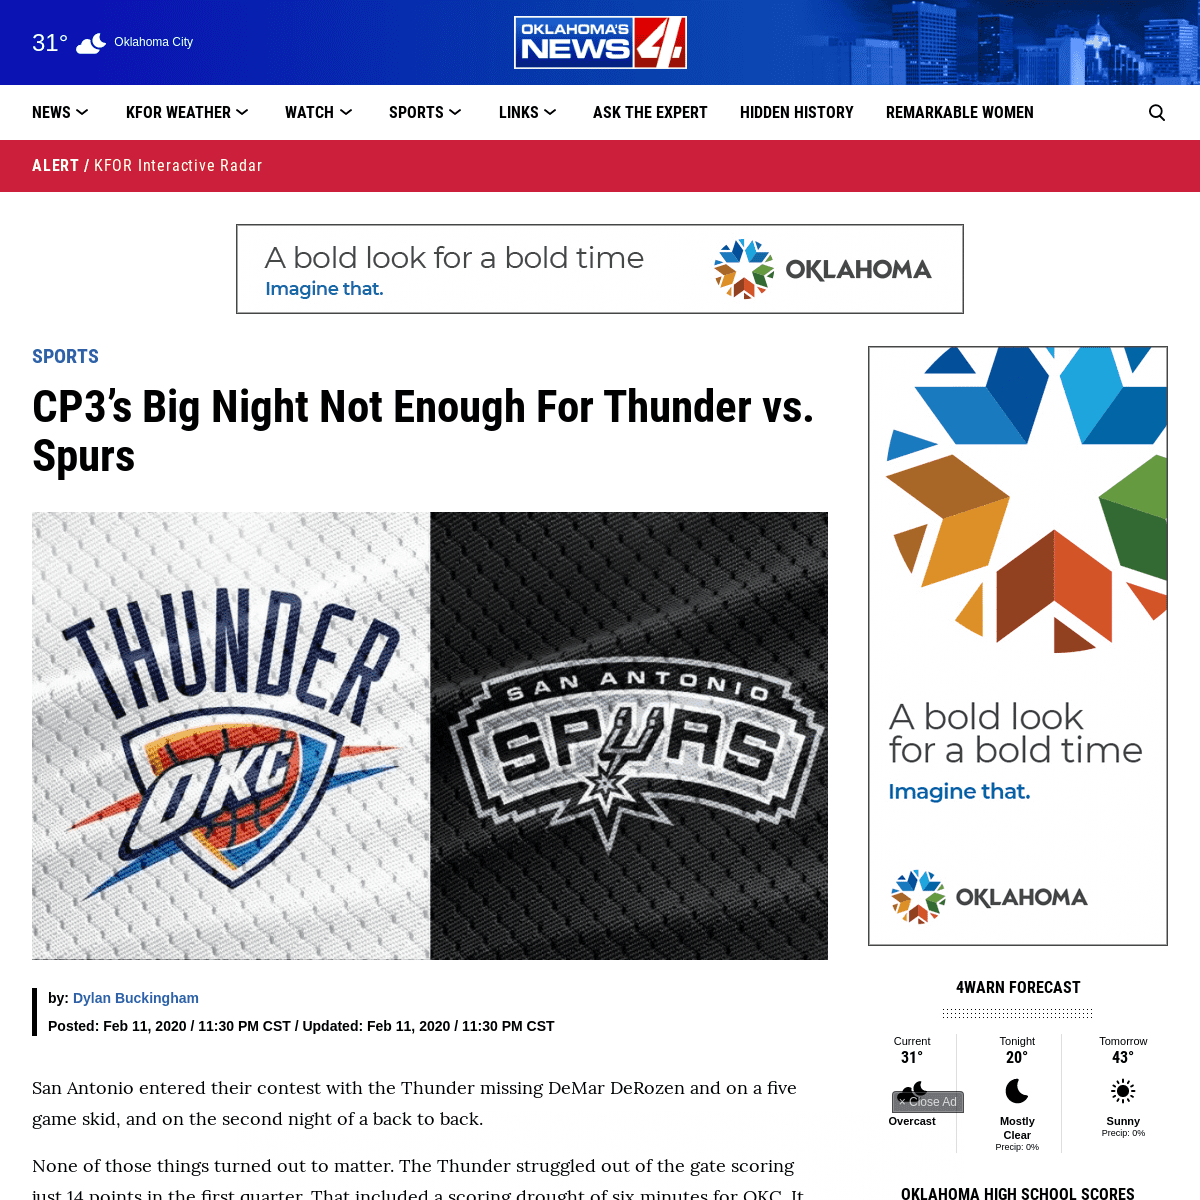 A complete backup of kfor.com/sports/cp3s-big-night-not-enough-for-thunder-vs-spurs/